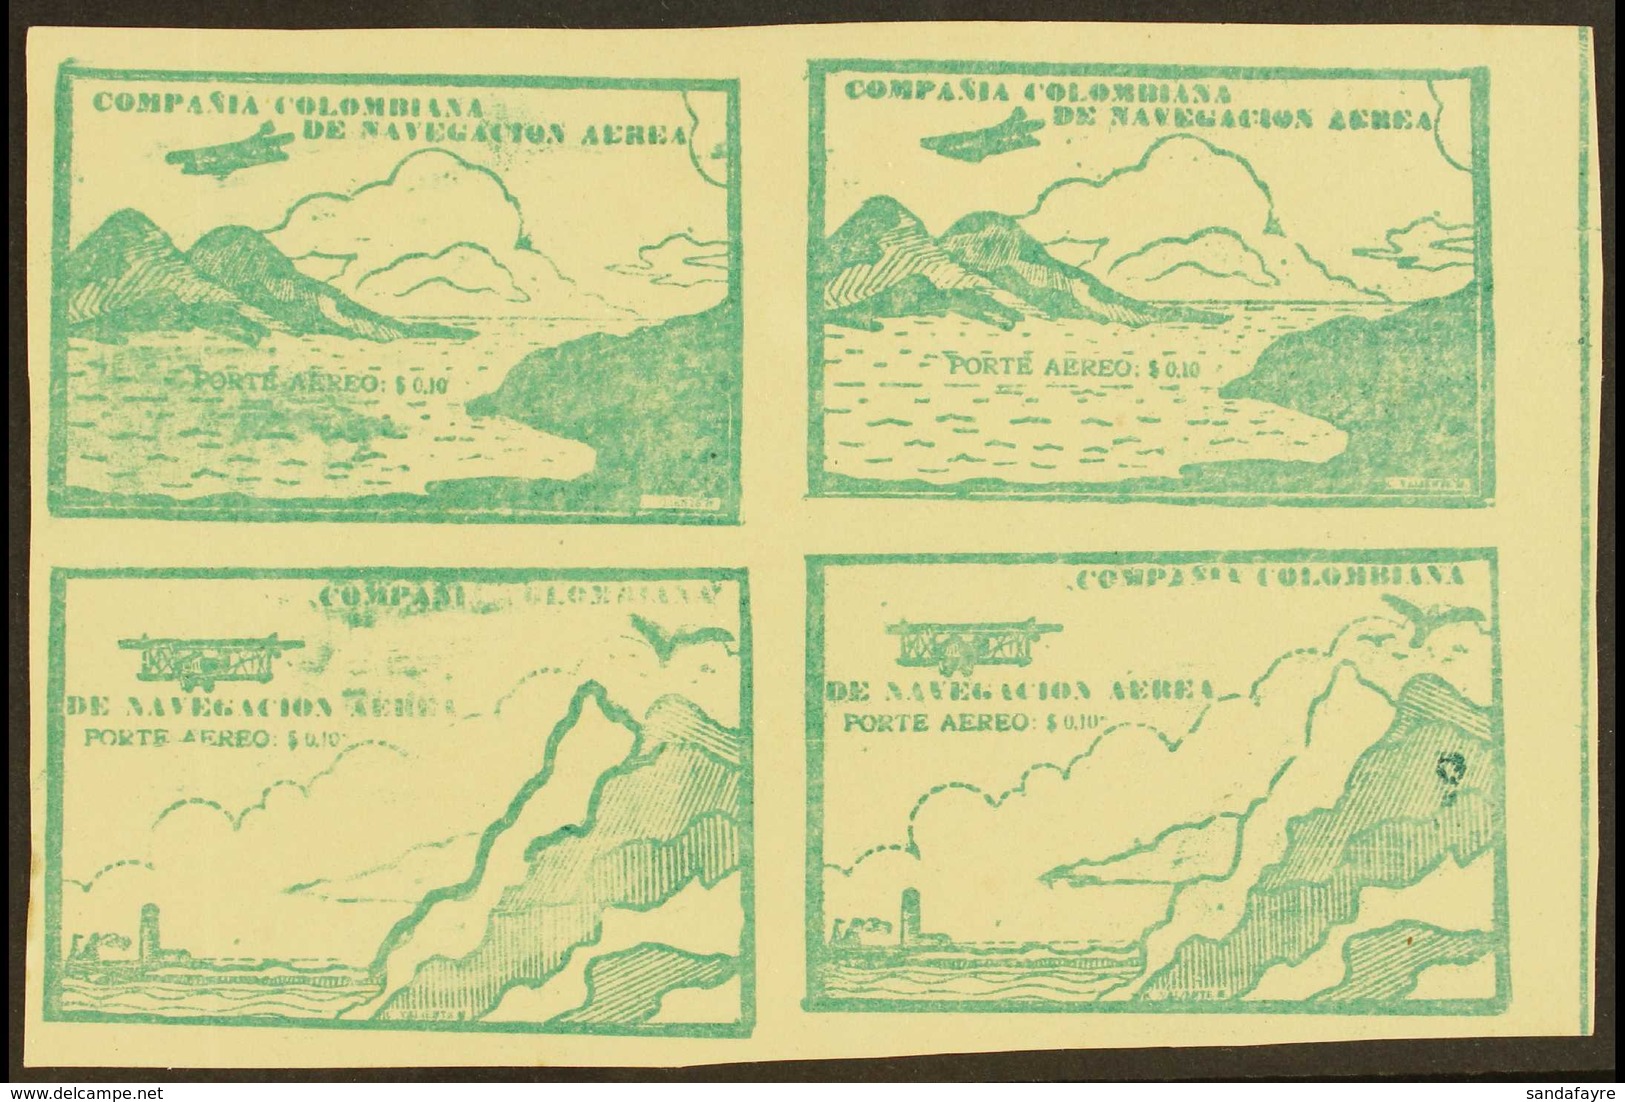 SCADTA 1920 10c Green Marginal Imperf SE-TENANT BLOCK Of 4 (positions 17/18 & 23/24), Containing Two 'Sea And Mountain'  - Colombia